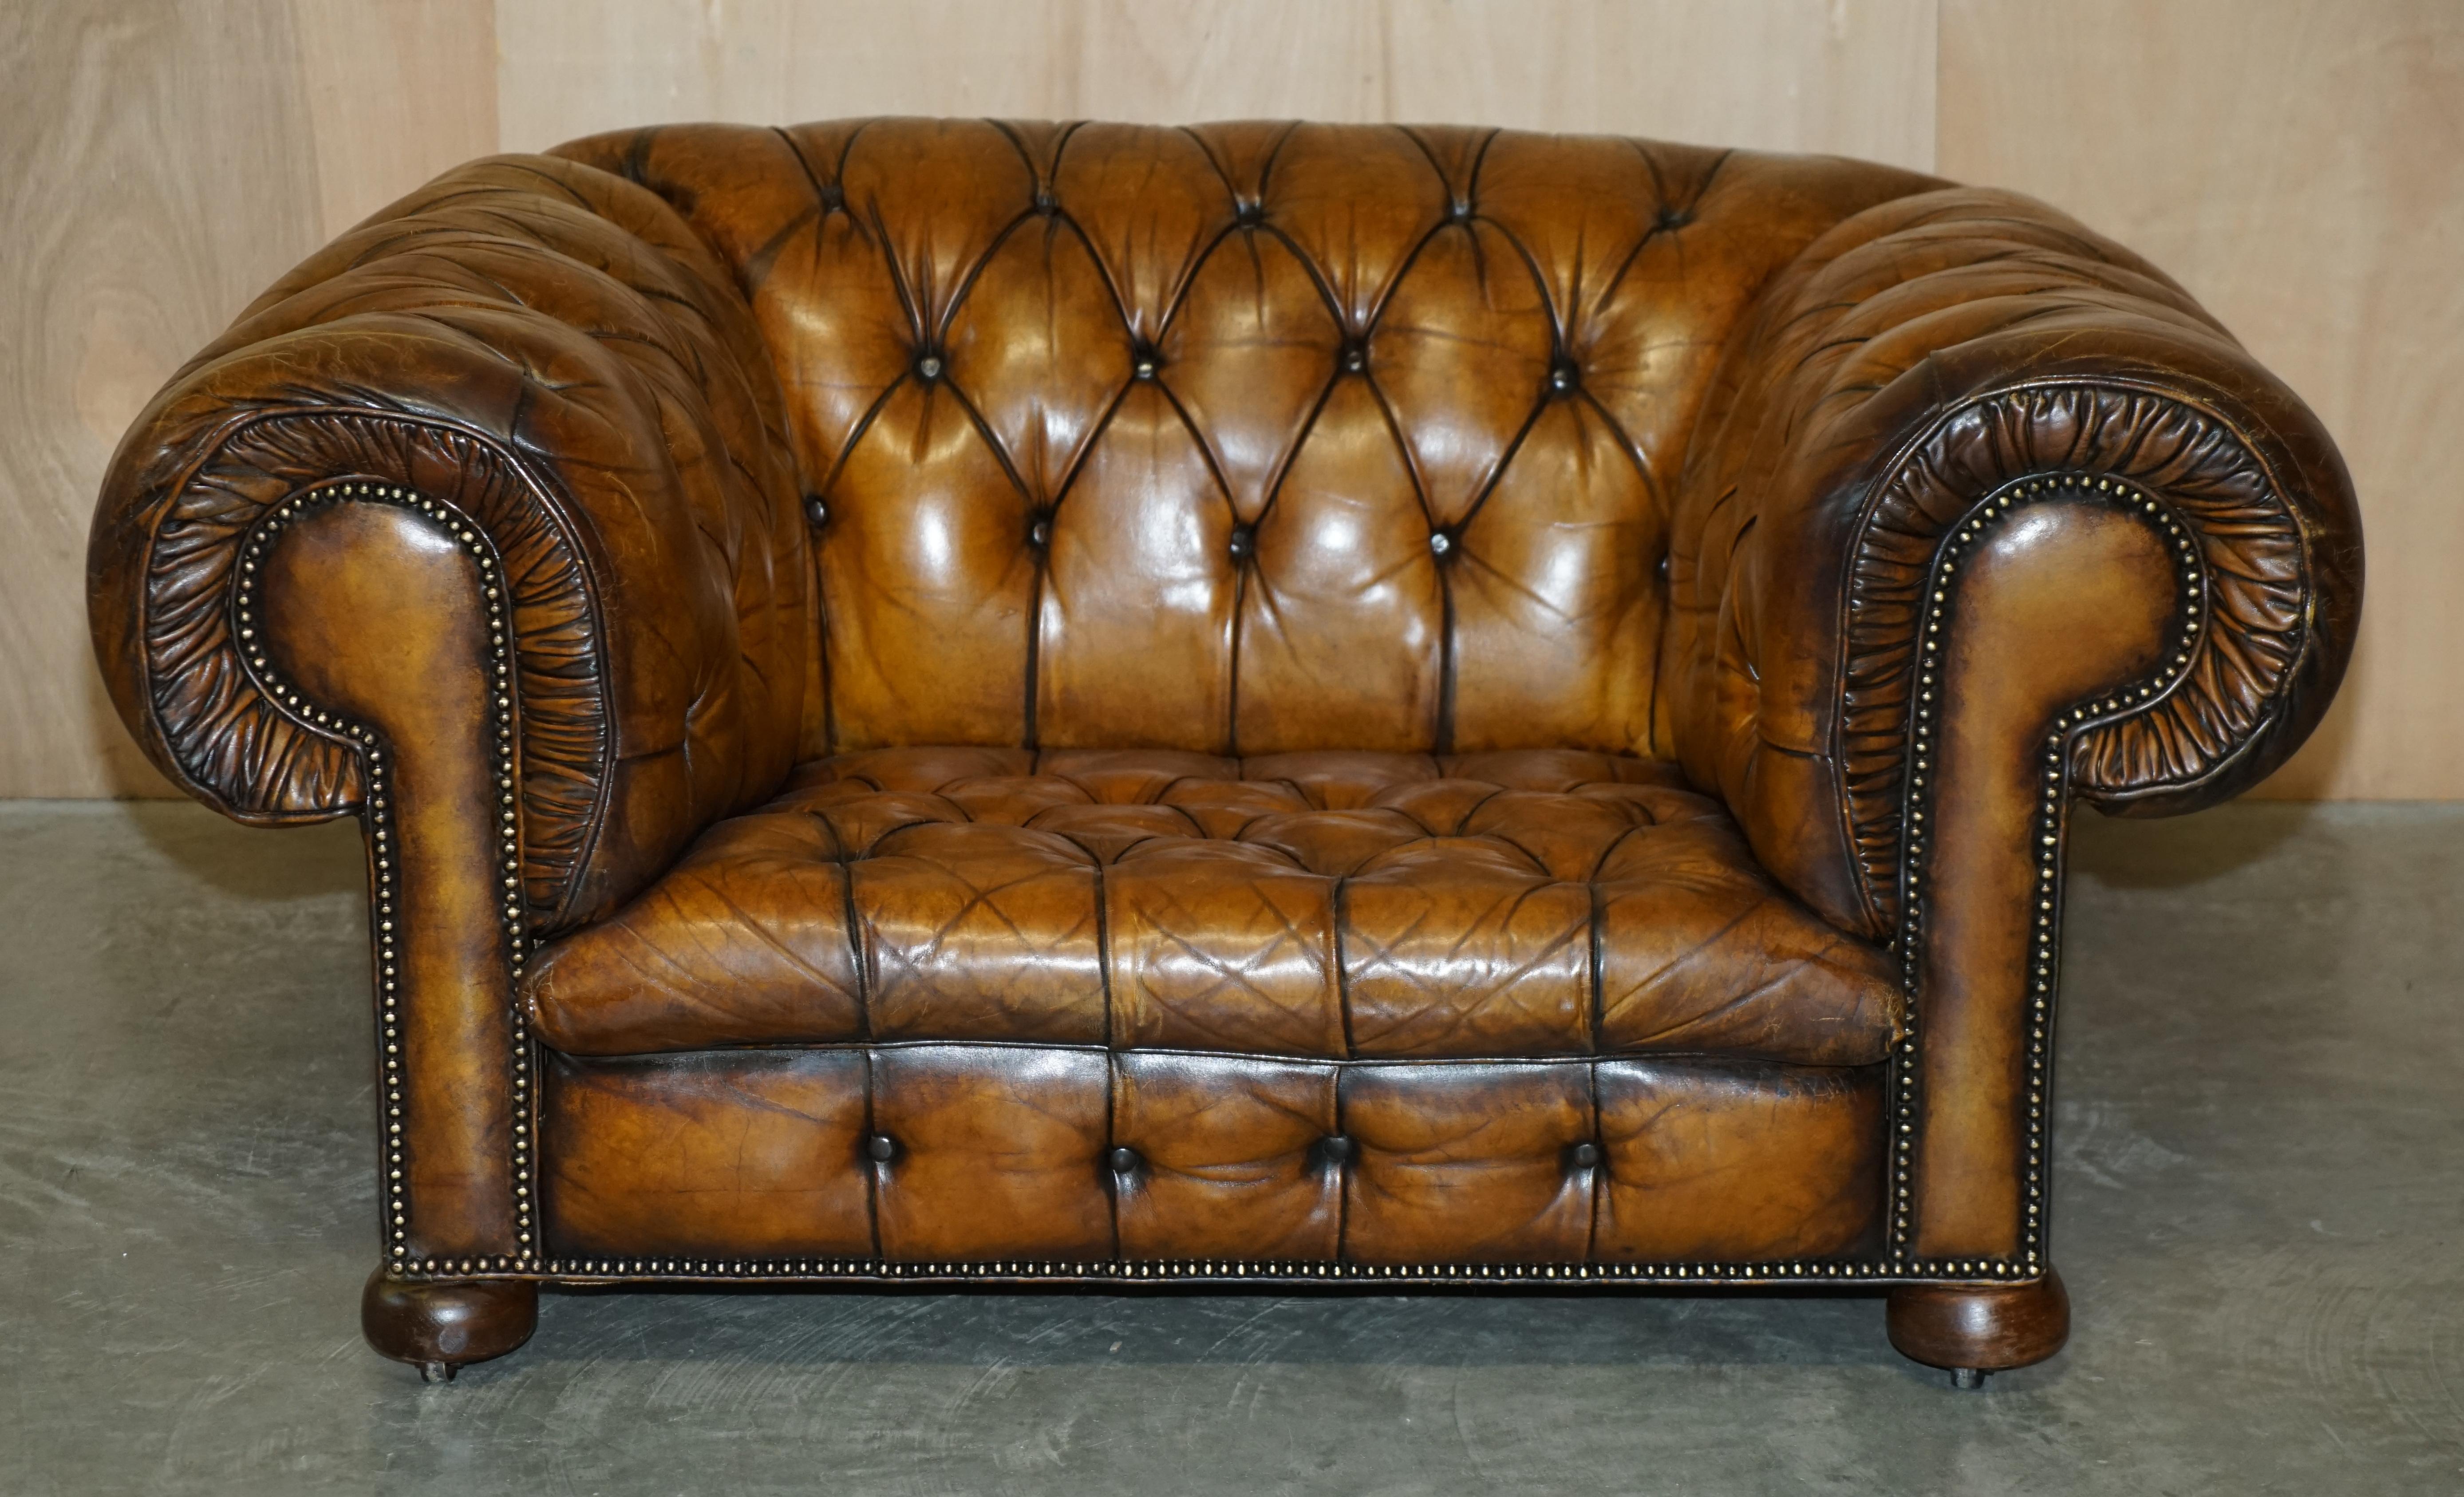 Royal House Antiques

Royal House Antiques is delighted to offer for sale this absolutely massive, original late Victorian Chesterfield club armchair with coil sprung frame and horse hair padding which has been fully restored 

A very well made,